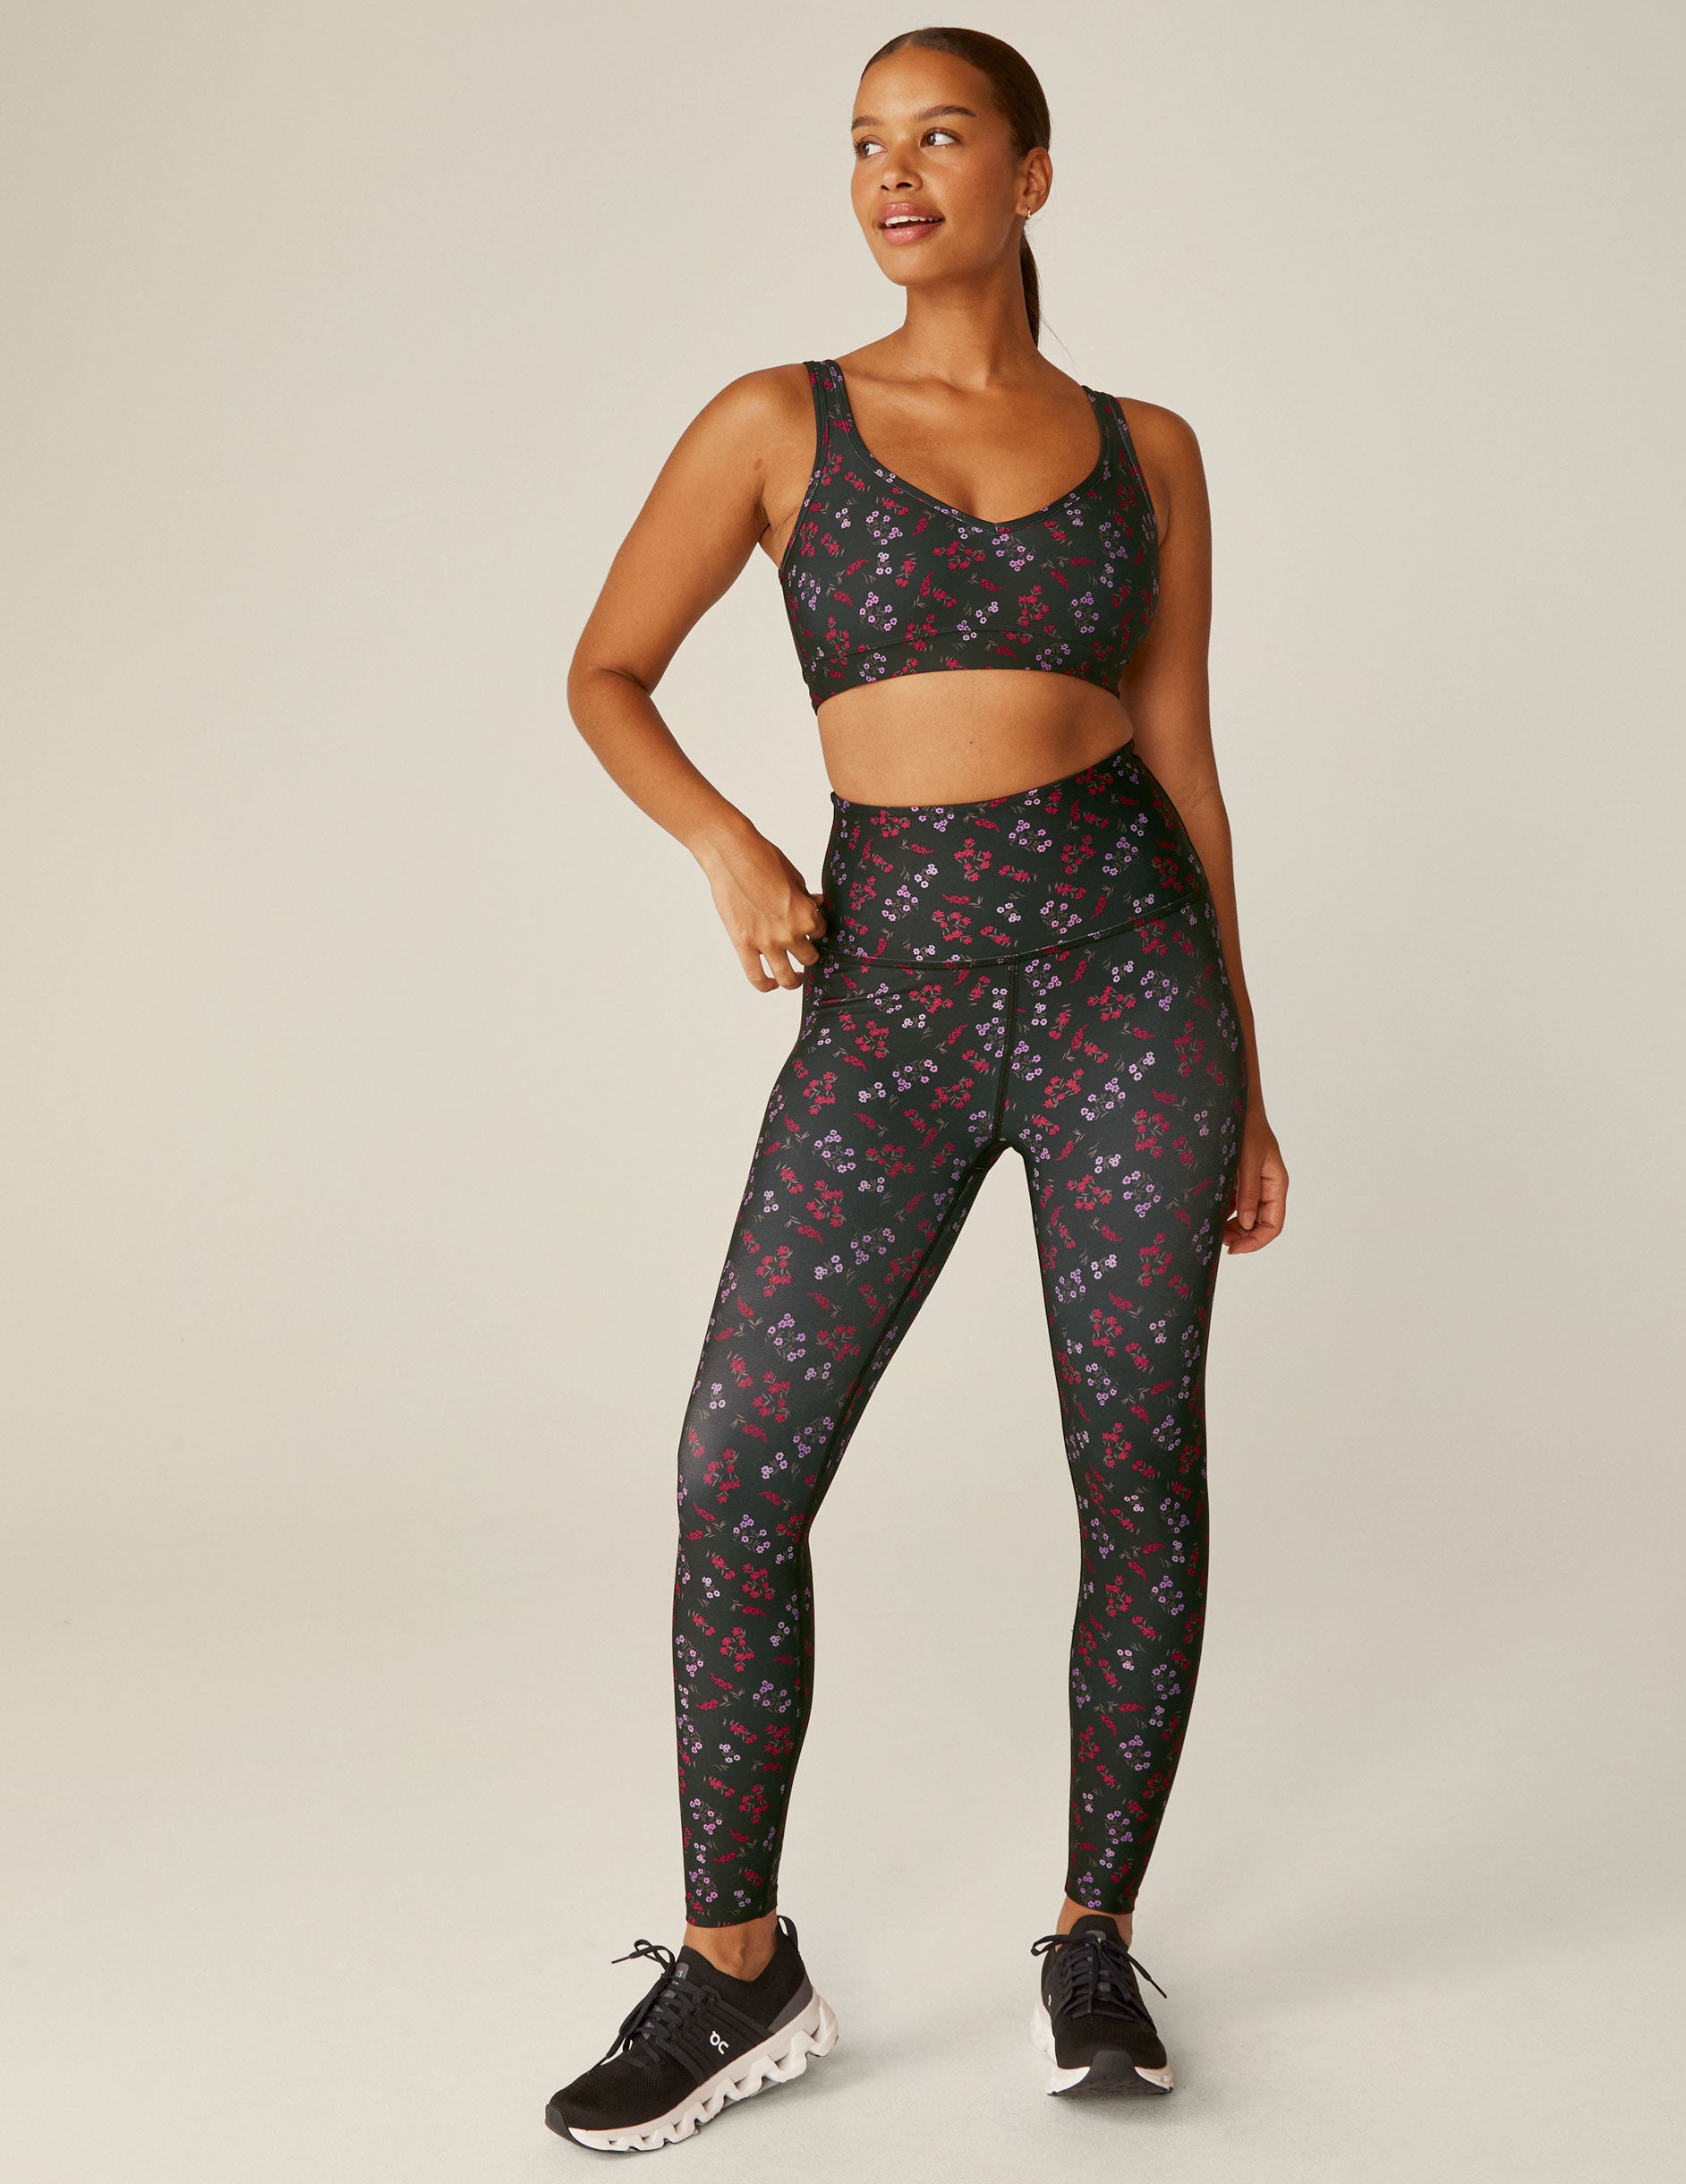 black floral printed (red and purple flowers) high-waisted midi leggings. 